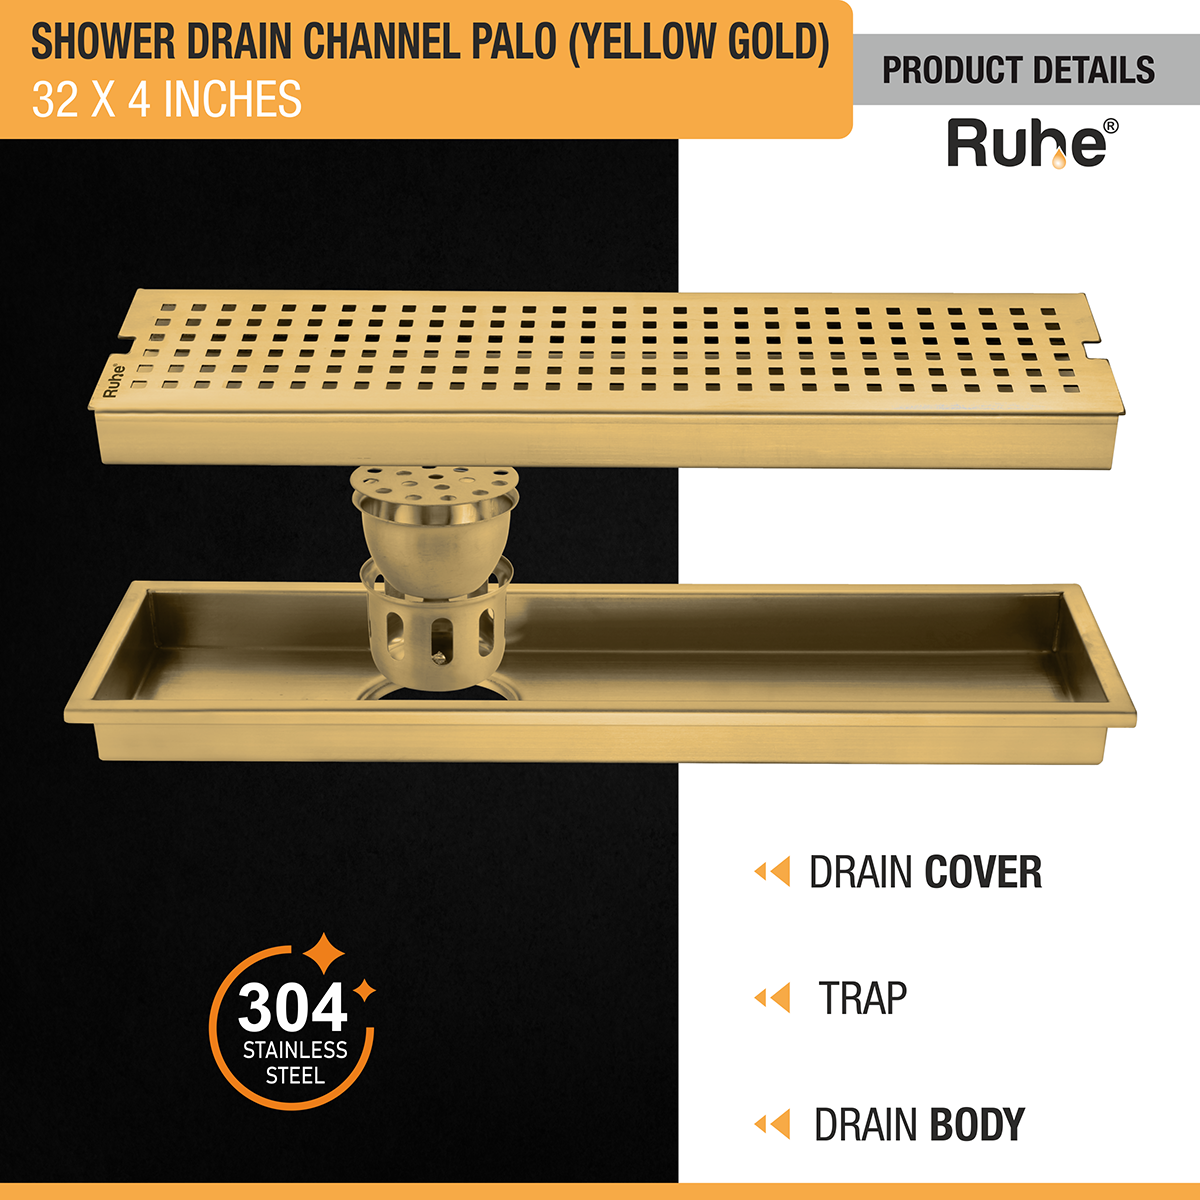 Palo Shower Drain Channel (32 x 4 Inches) YELLOW GOLD product details